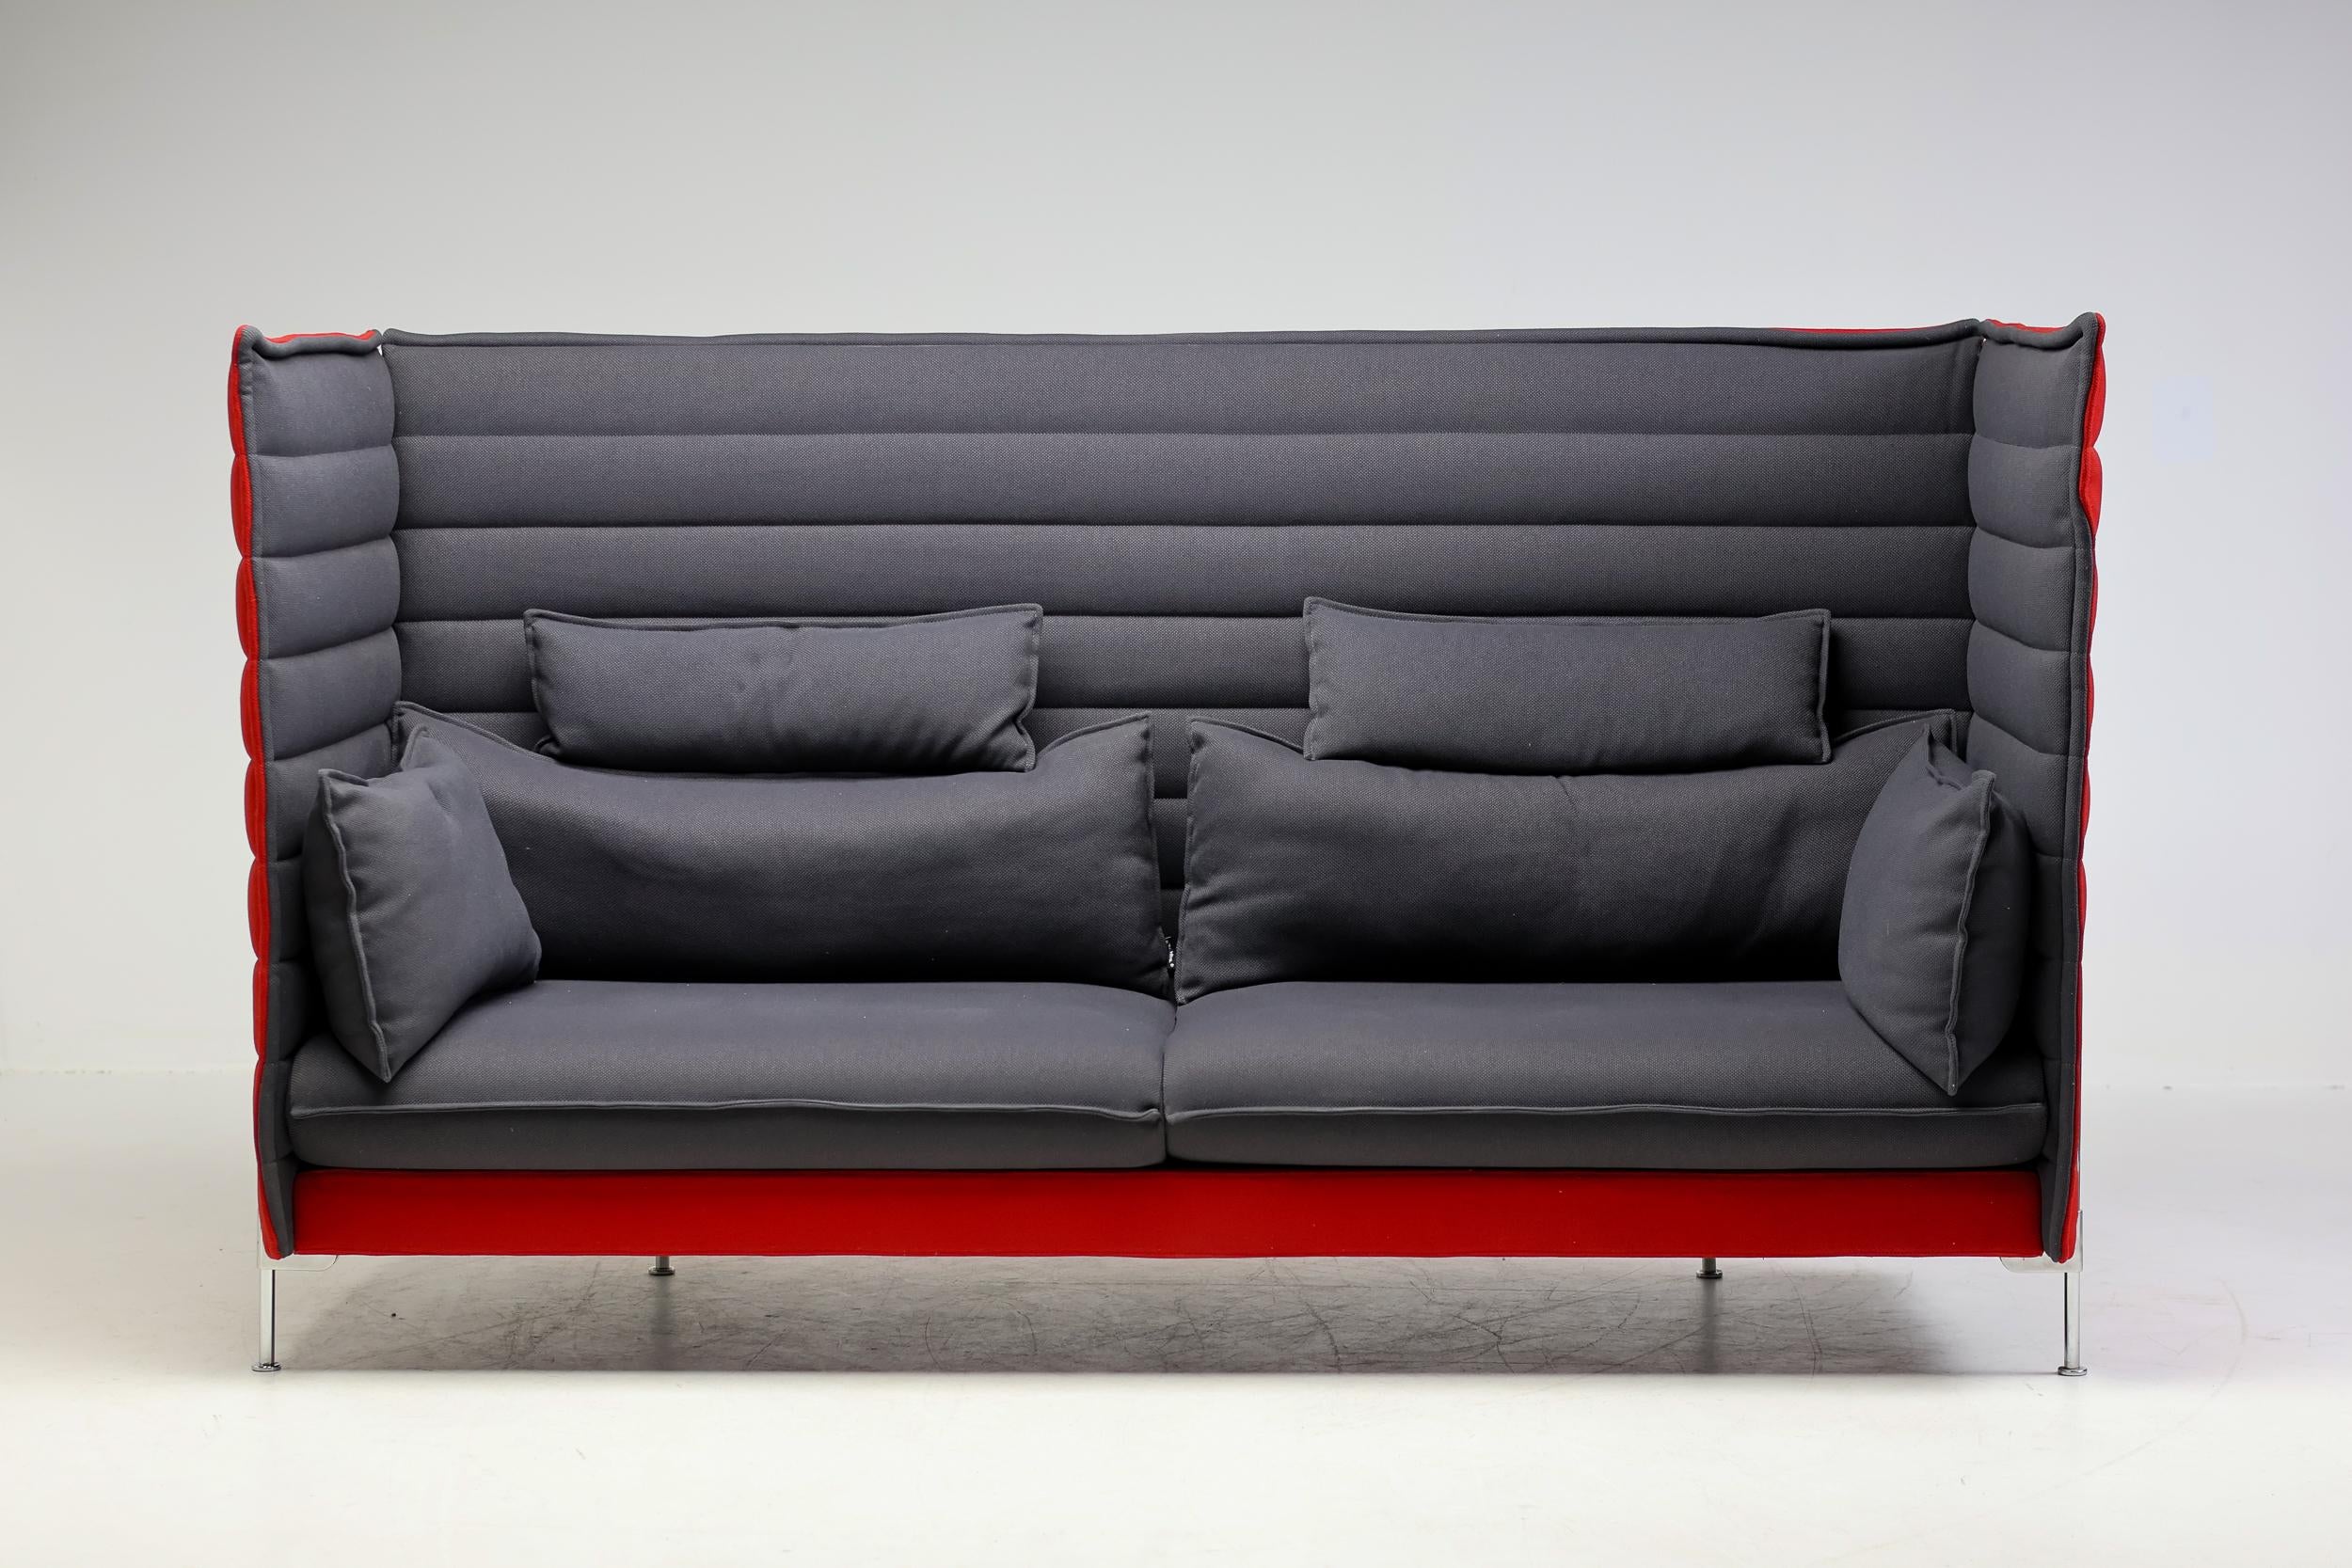 A sofa is both a social space and a security zone. It’s an environment of its own: a room inside a room, inside a home. With this in mind, Ronan and Erwan Bouroullec designed the Alcove Sofa, which was inspired by the Arabic “al-qubba”, and is a